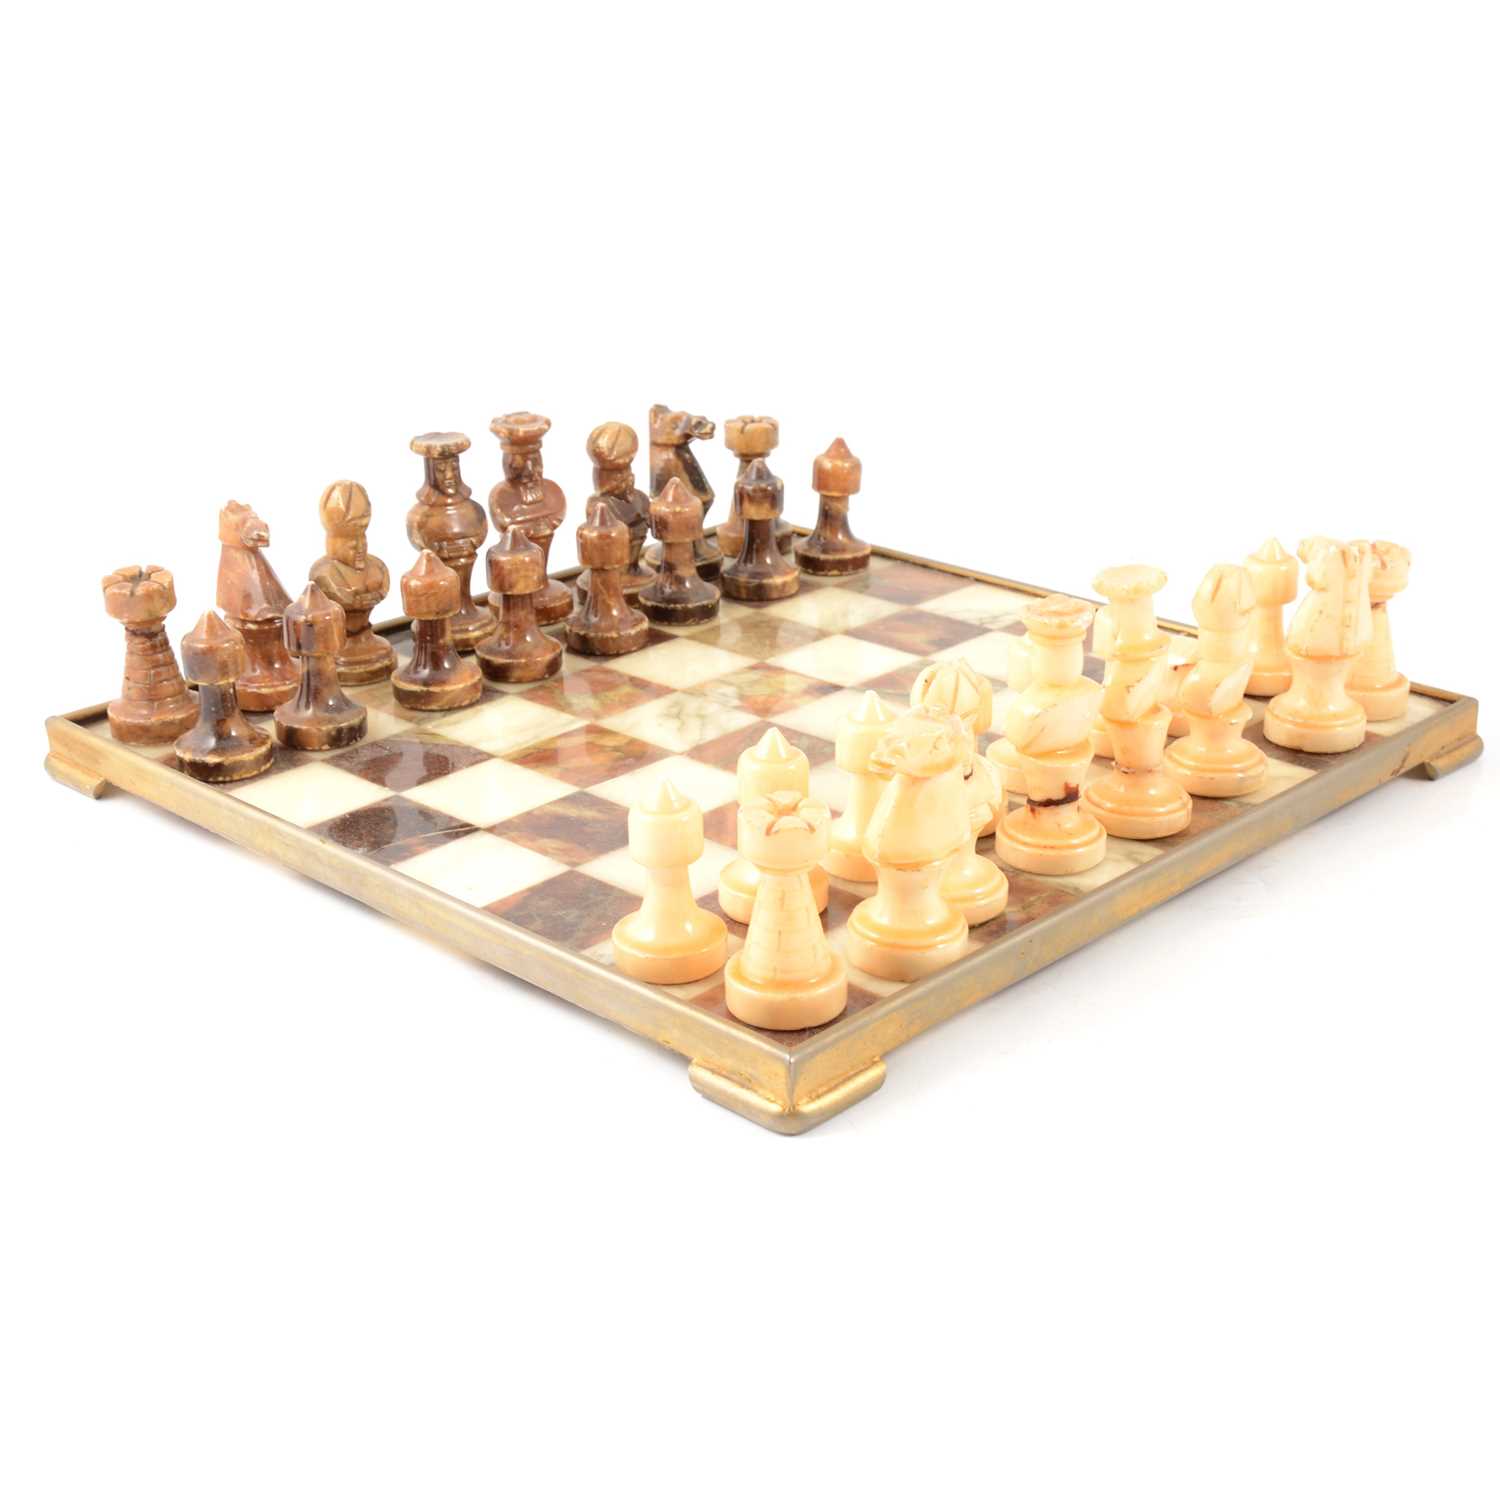 Lot 159 - Onyx chess set with board and composition chess pieces